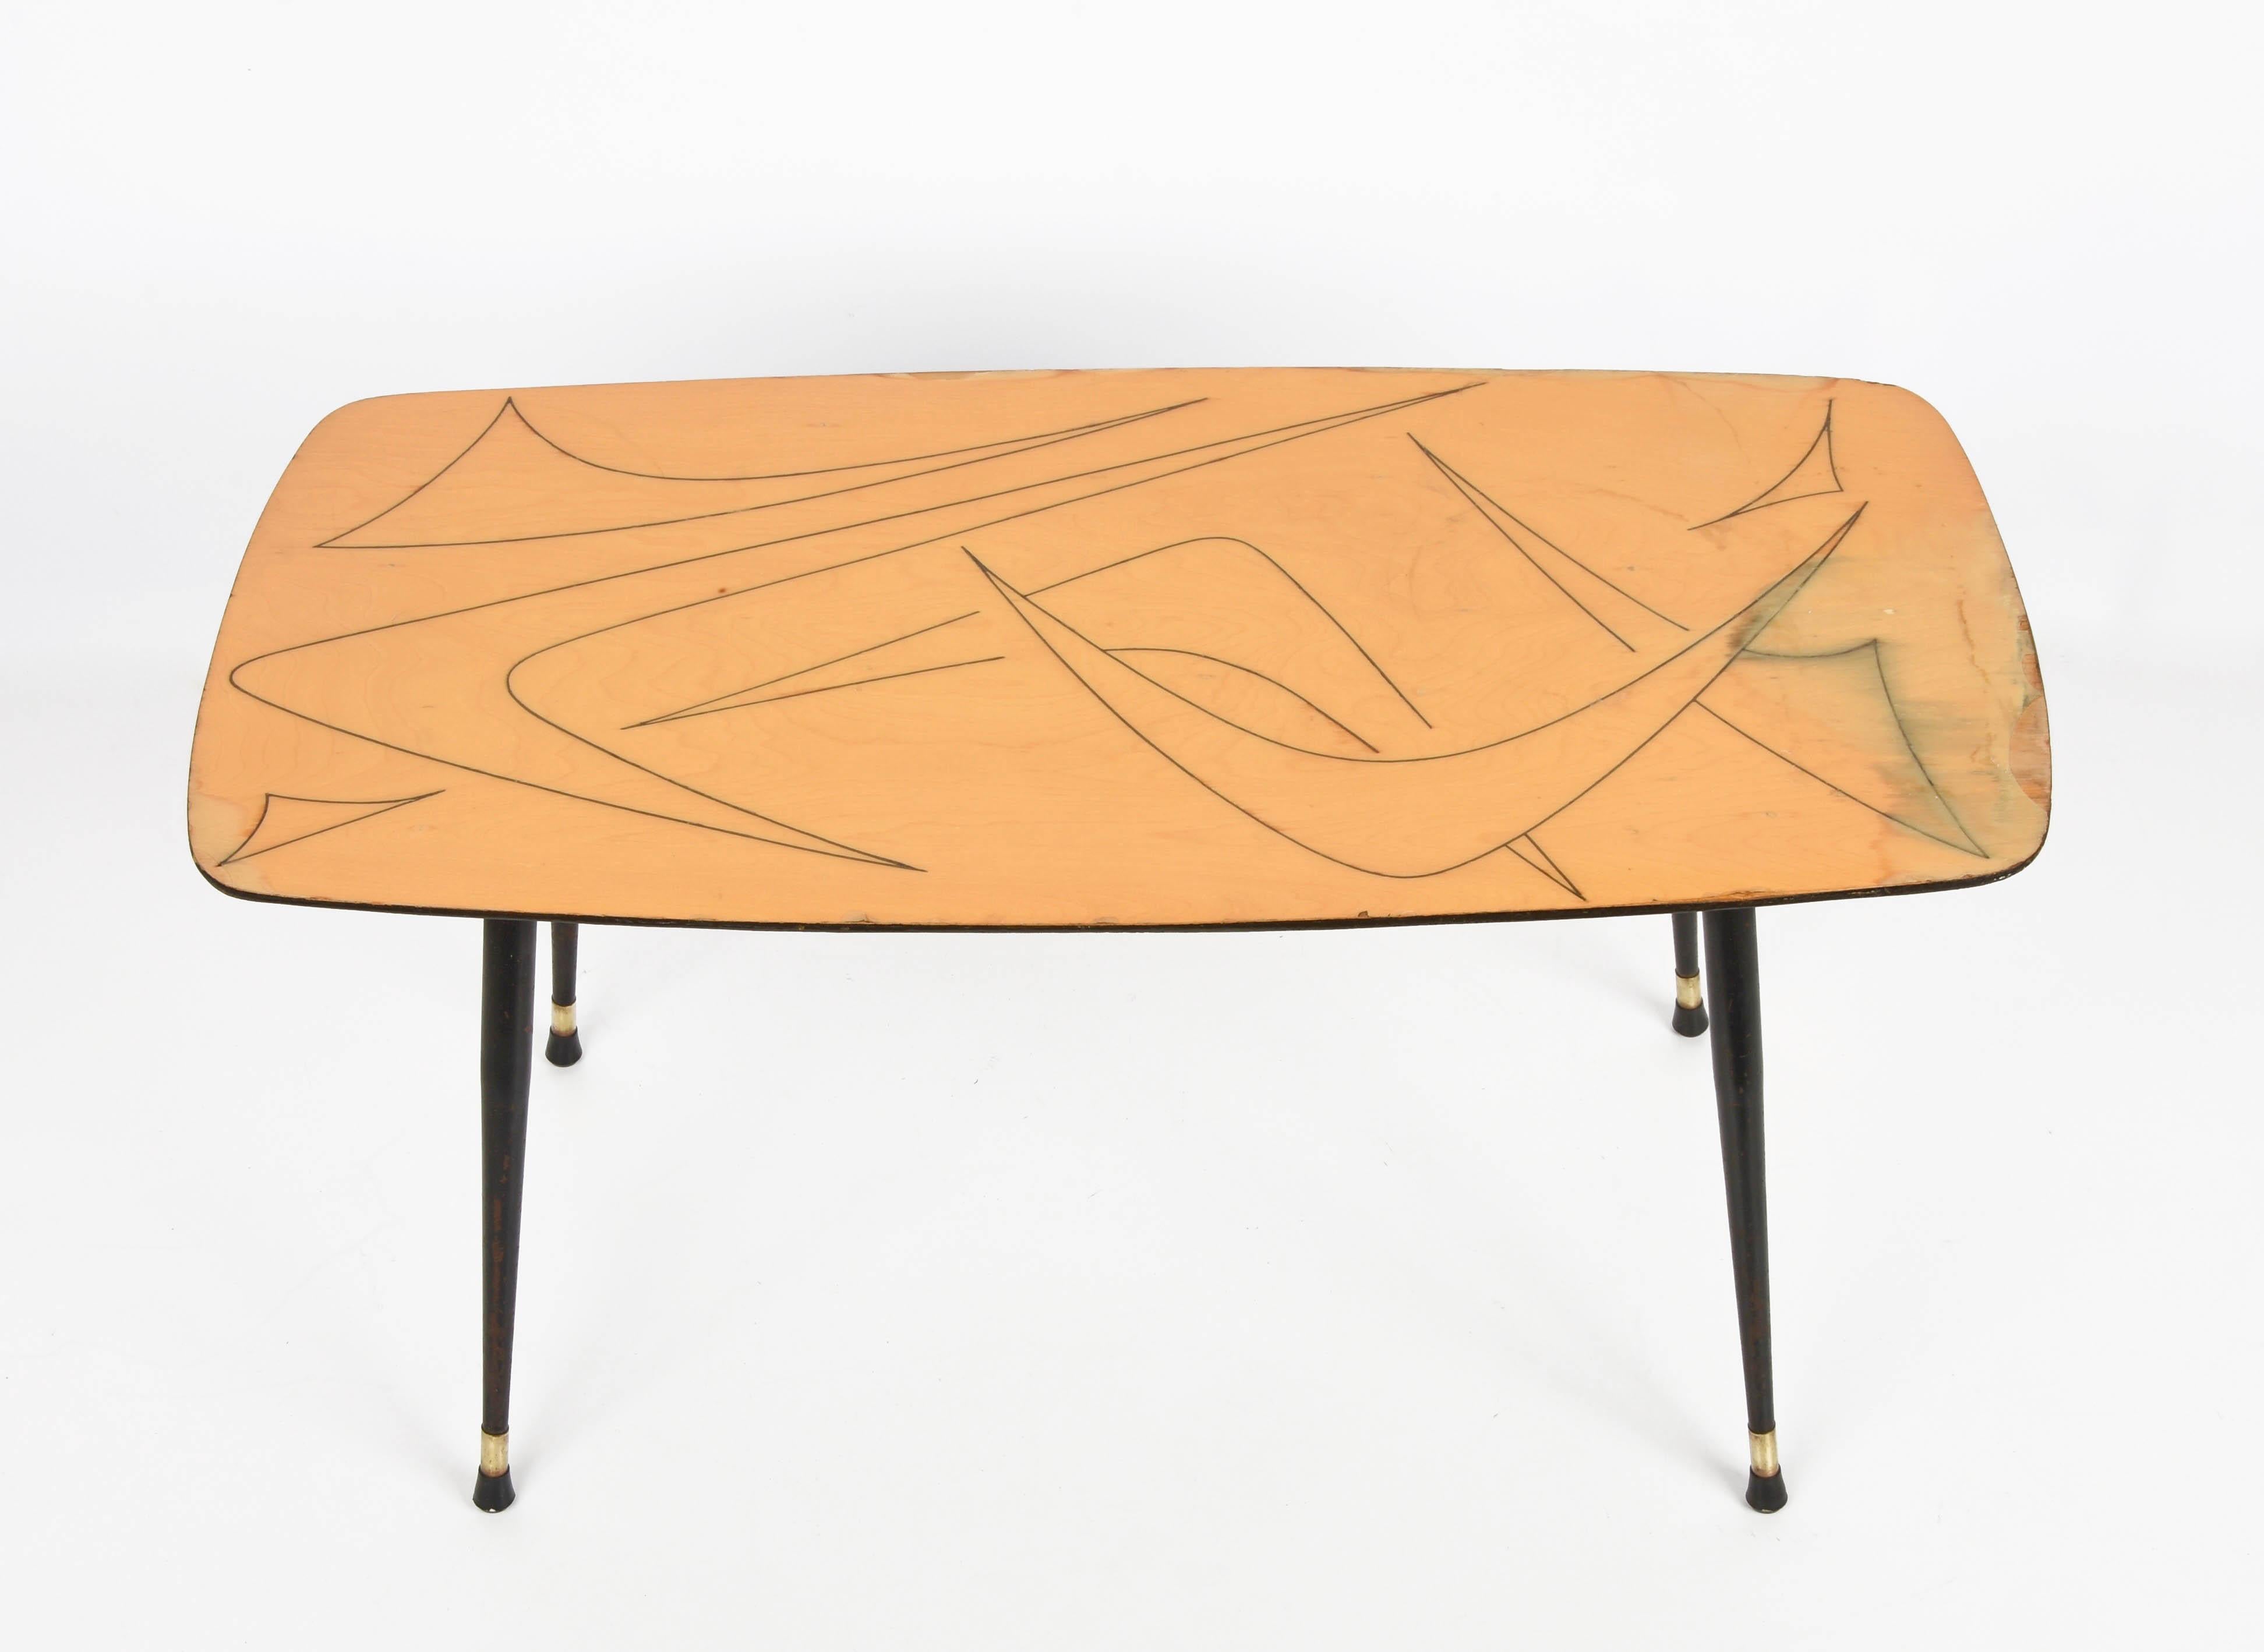 Mid-20th Century Midcentury Italian Painted Wood, Brass and Black Metal Coffee Table, 1950s For Sale